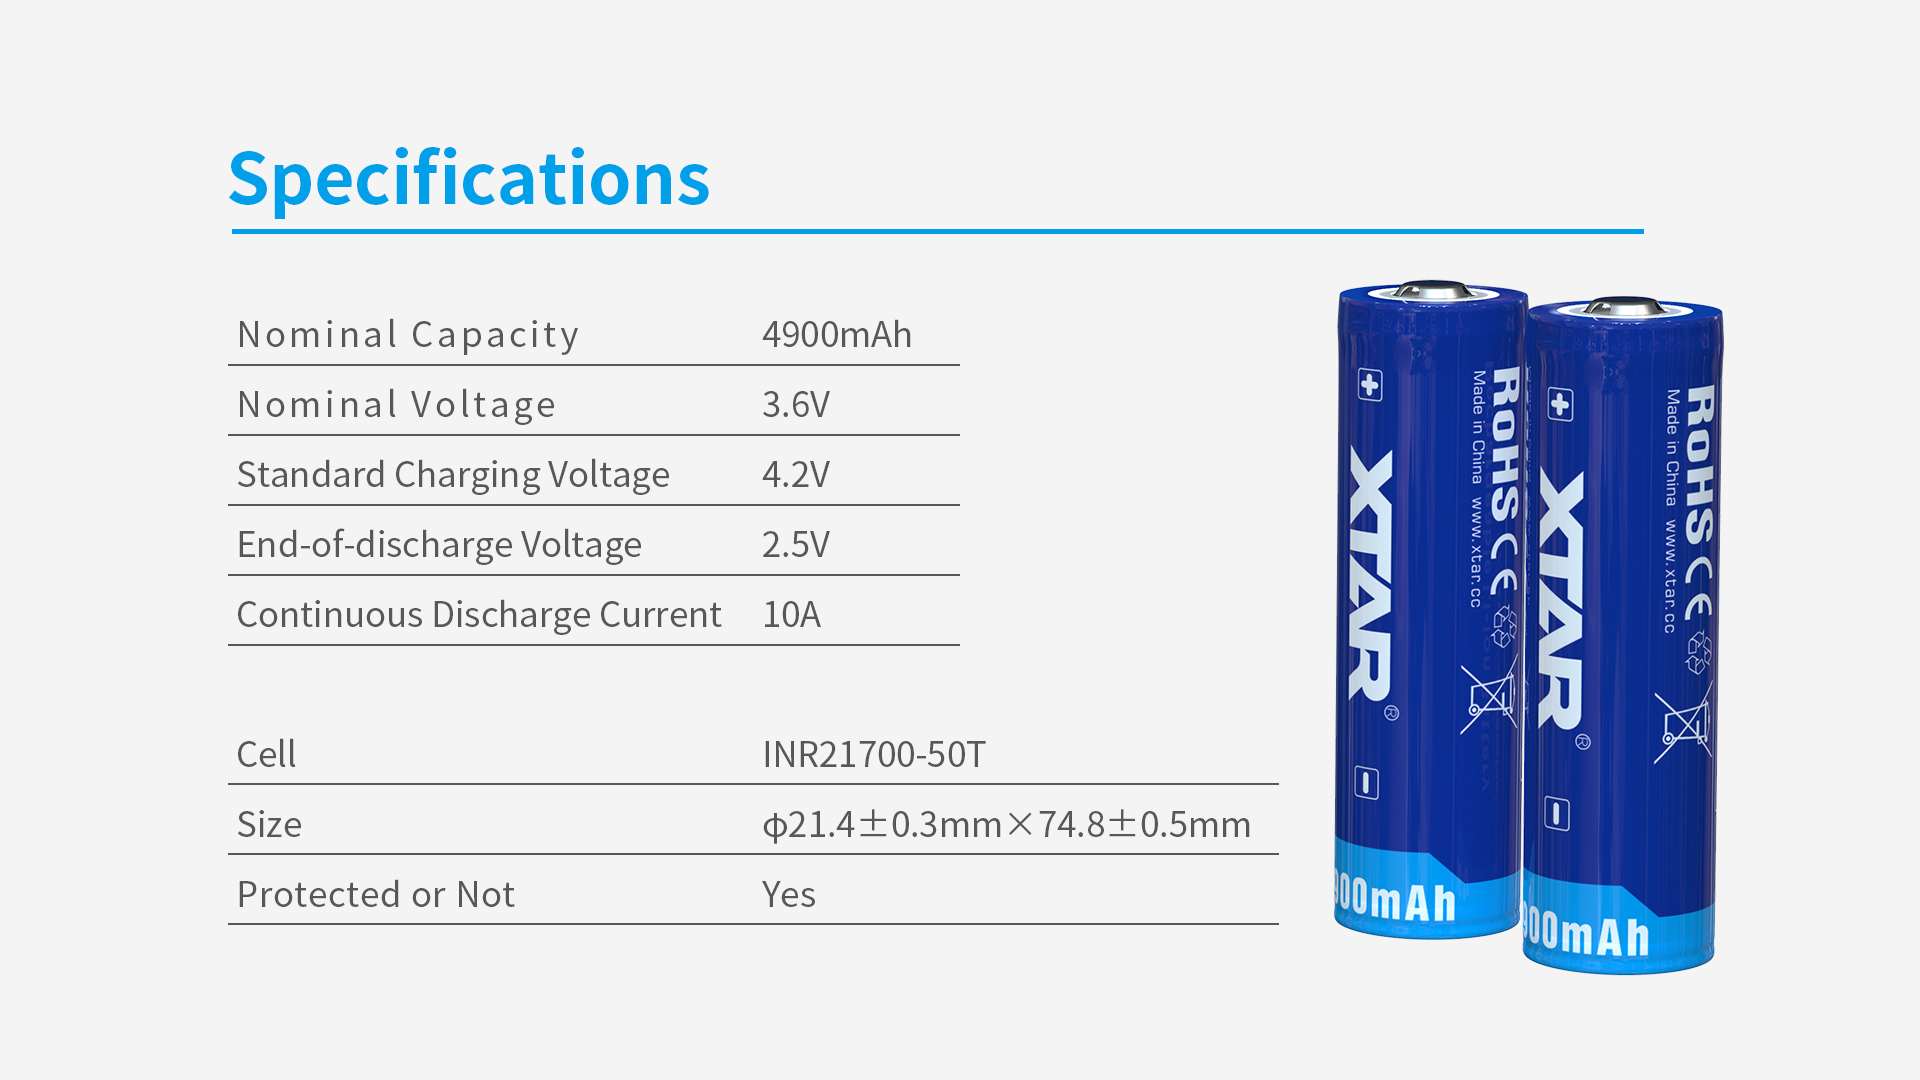 specifications for xtar protected 21700 battery 4900mAh